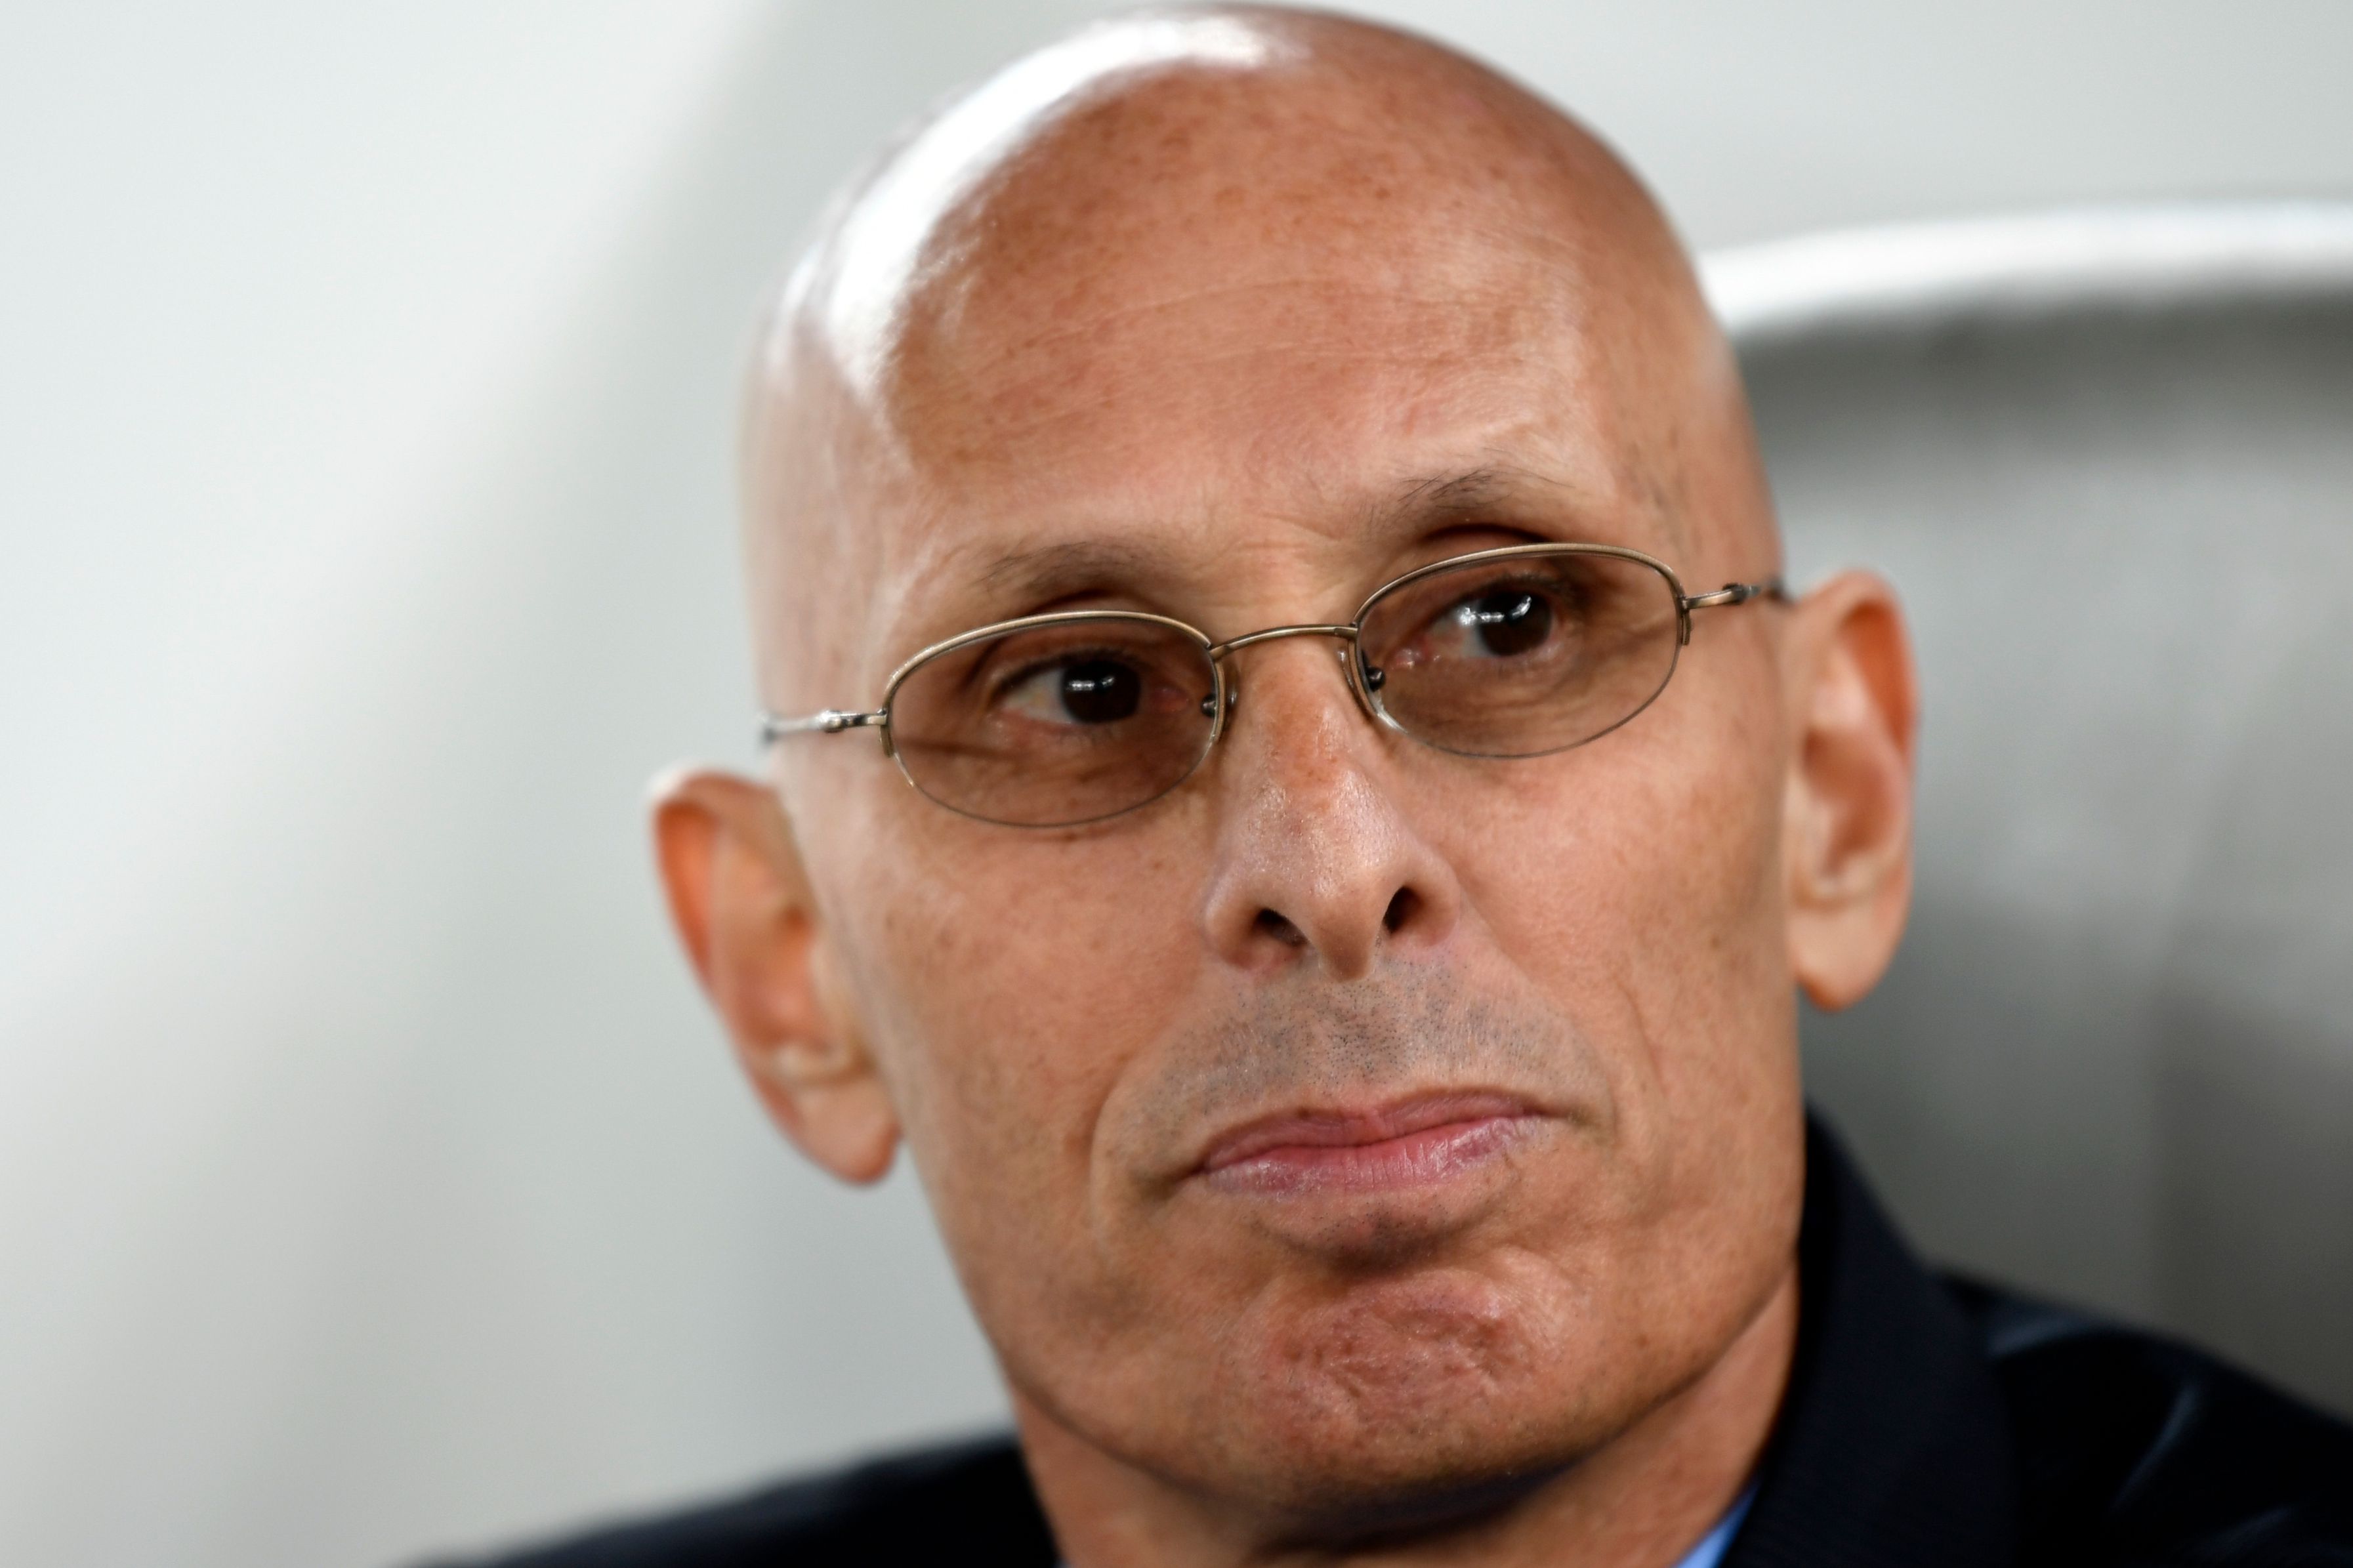 India's coach Stephen Constantine looks on ahead of the 2019 AFC Asian Cup group A football match between India and UAE at Zayed Sports City stadium in Abu Dhabi  on January 10, 2019. (Photo by Khaled DESOUKI / AFP)        (Photo credit should read KHALED DESOUKI/AFP/Getty Images)